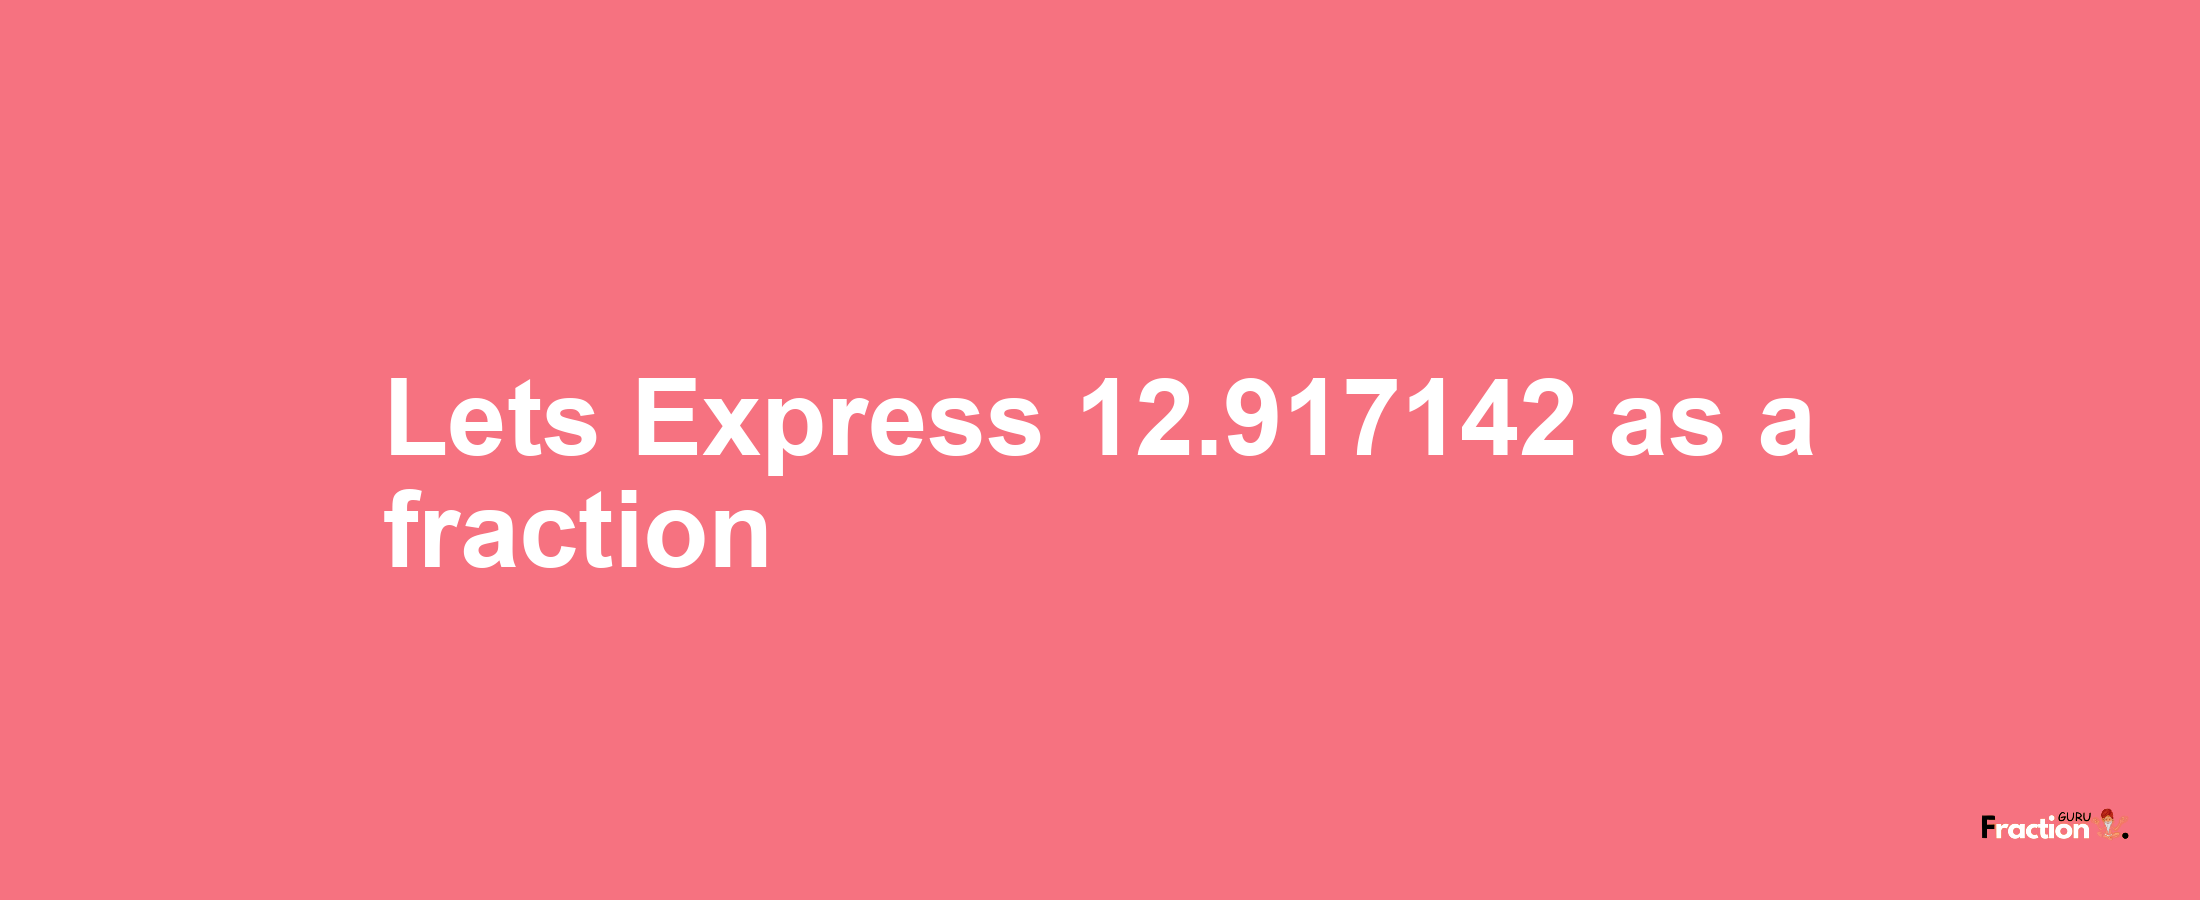 Lets Express 12.917142 as afraction